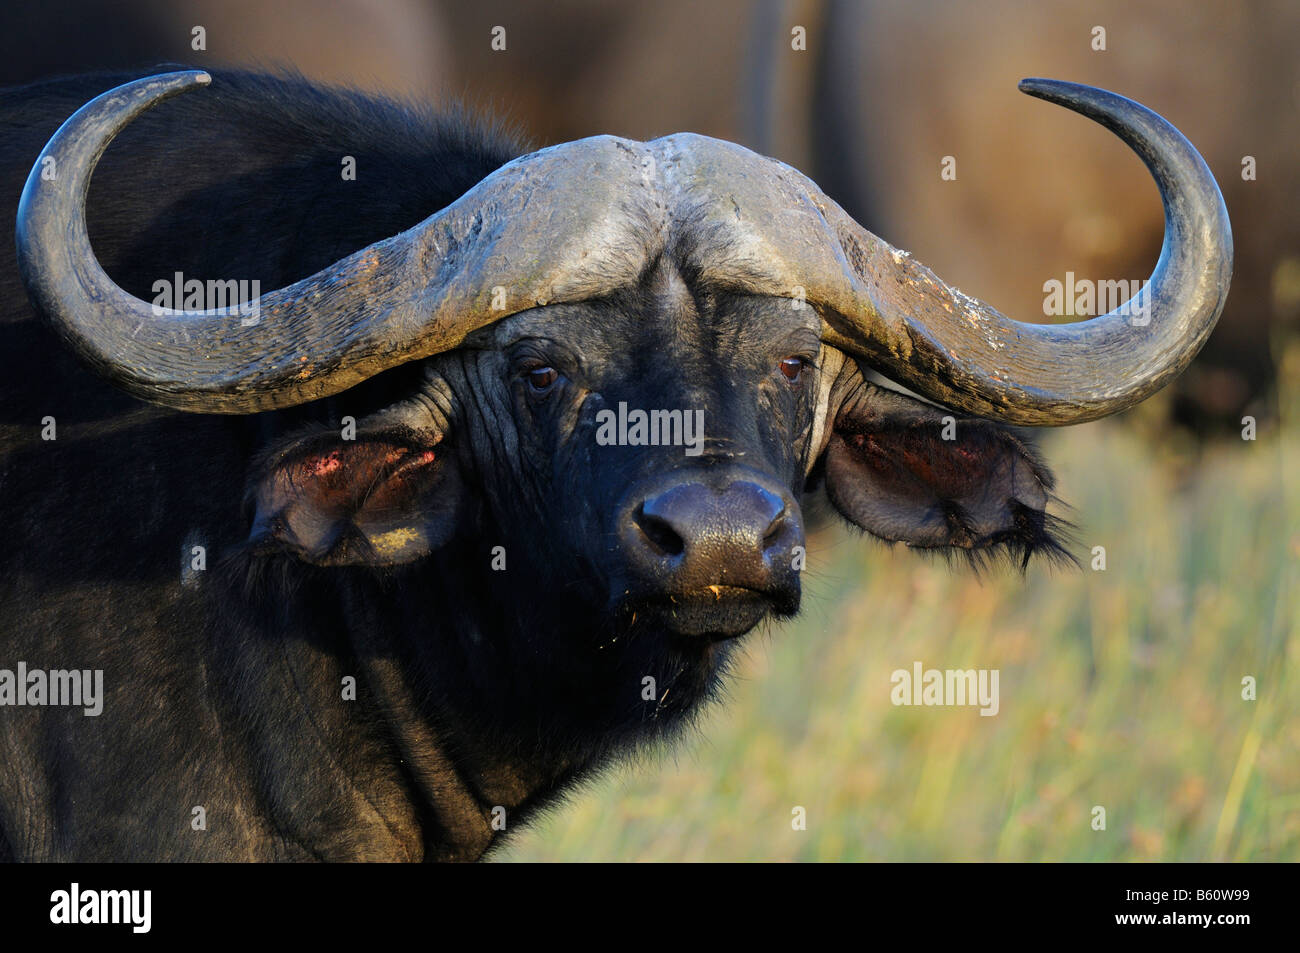 African Buffalo or Cape Buffalo (Syncerus caffer), portrait, Sweetwaters Game Reserve, Kenya, East Africa, Africa Stock Photo